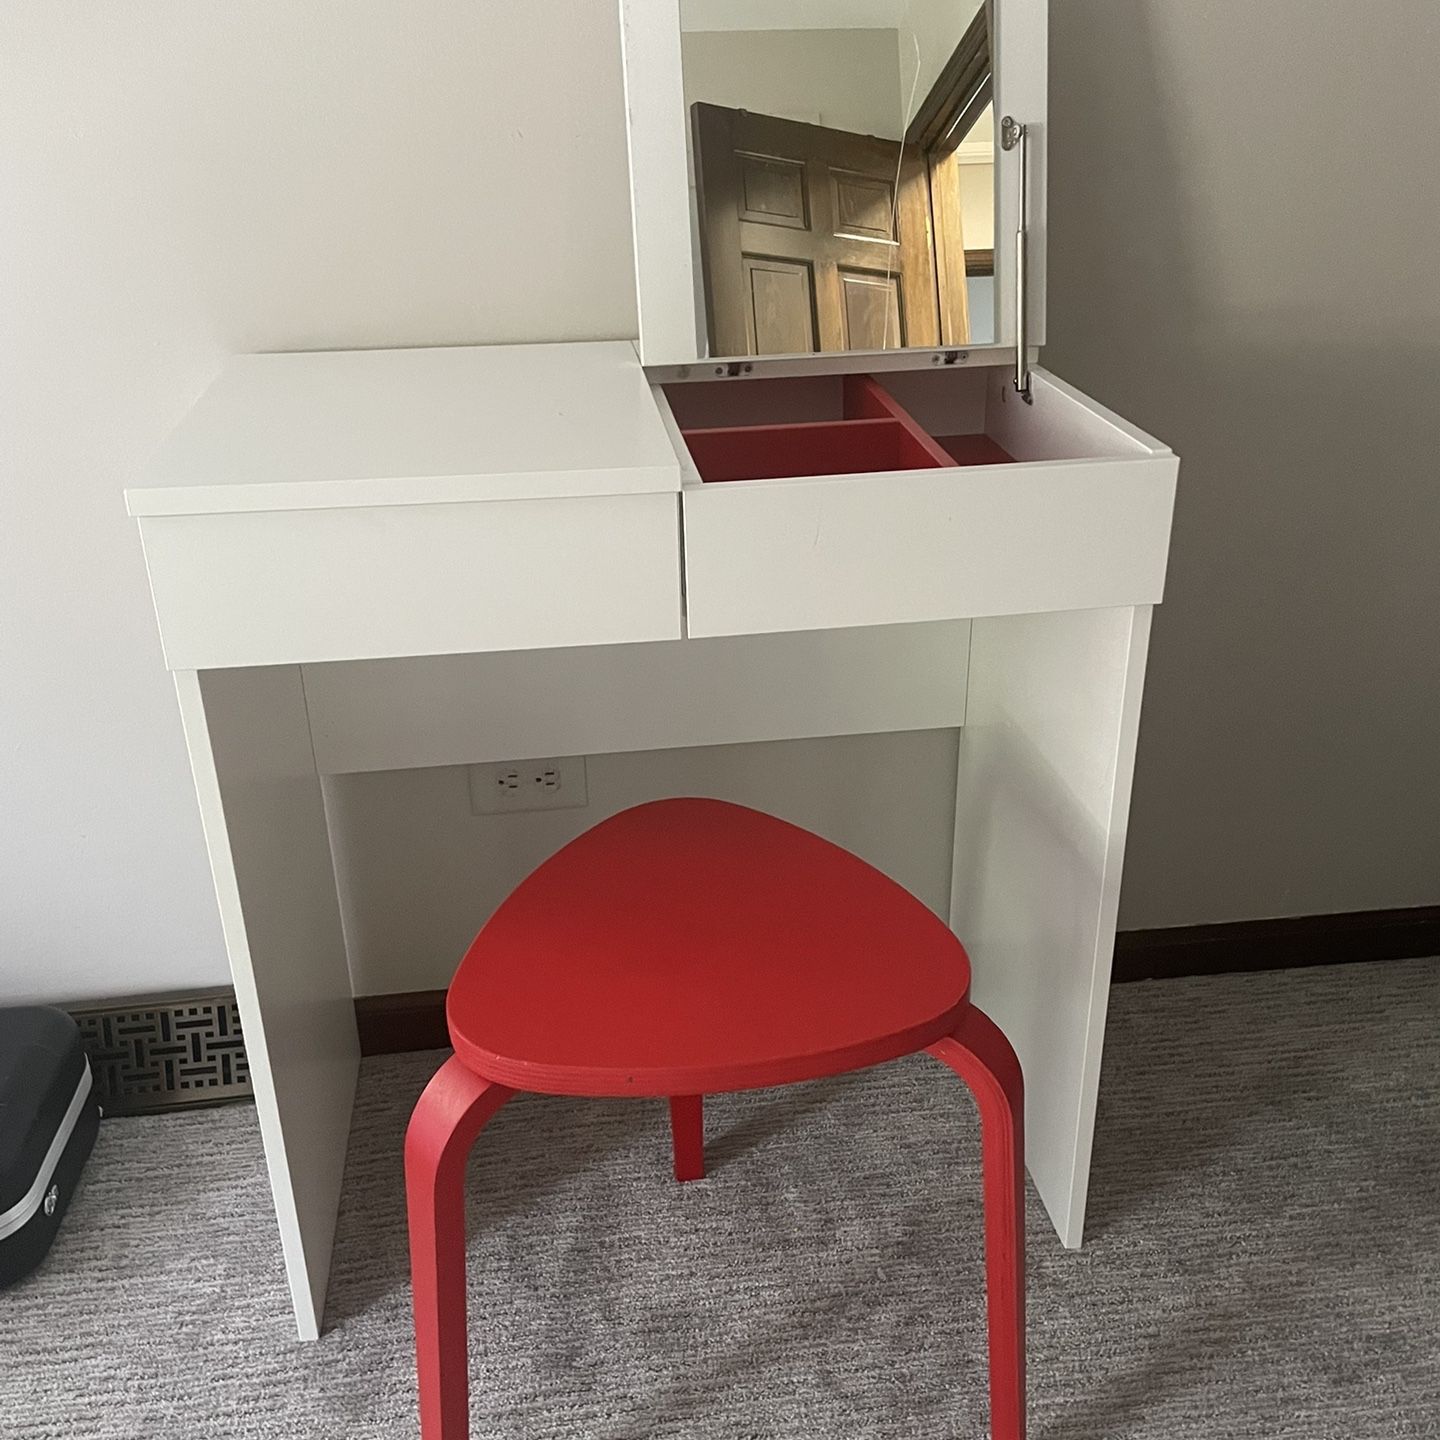 Ikea Kids desk and chair